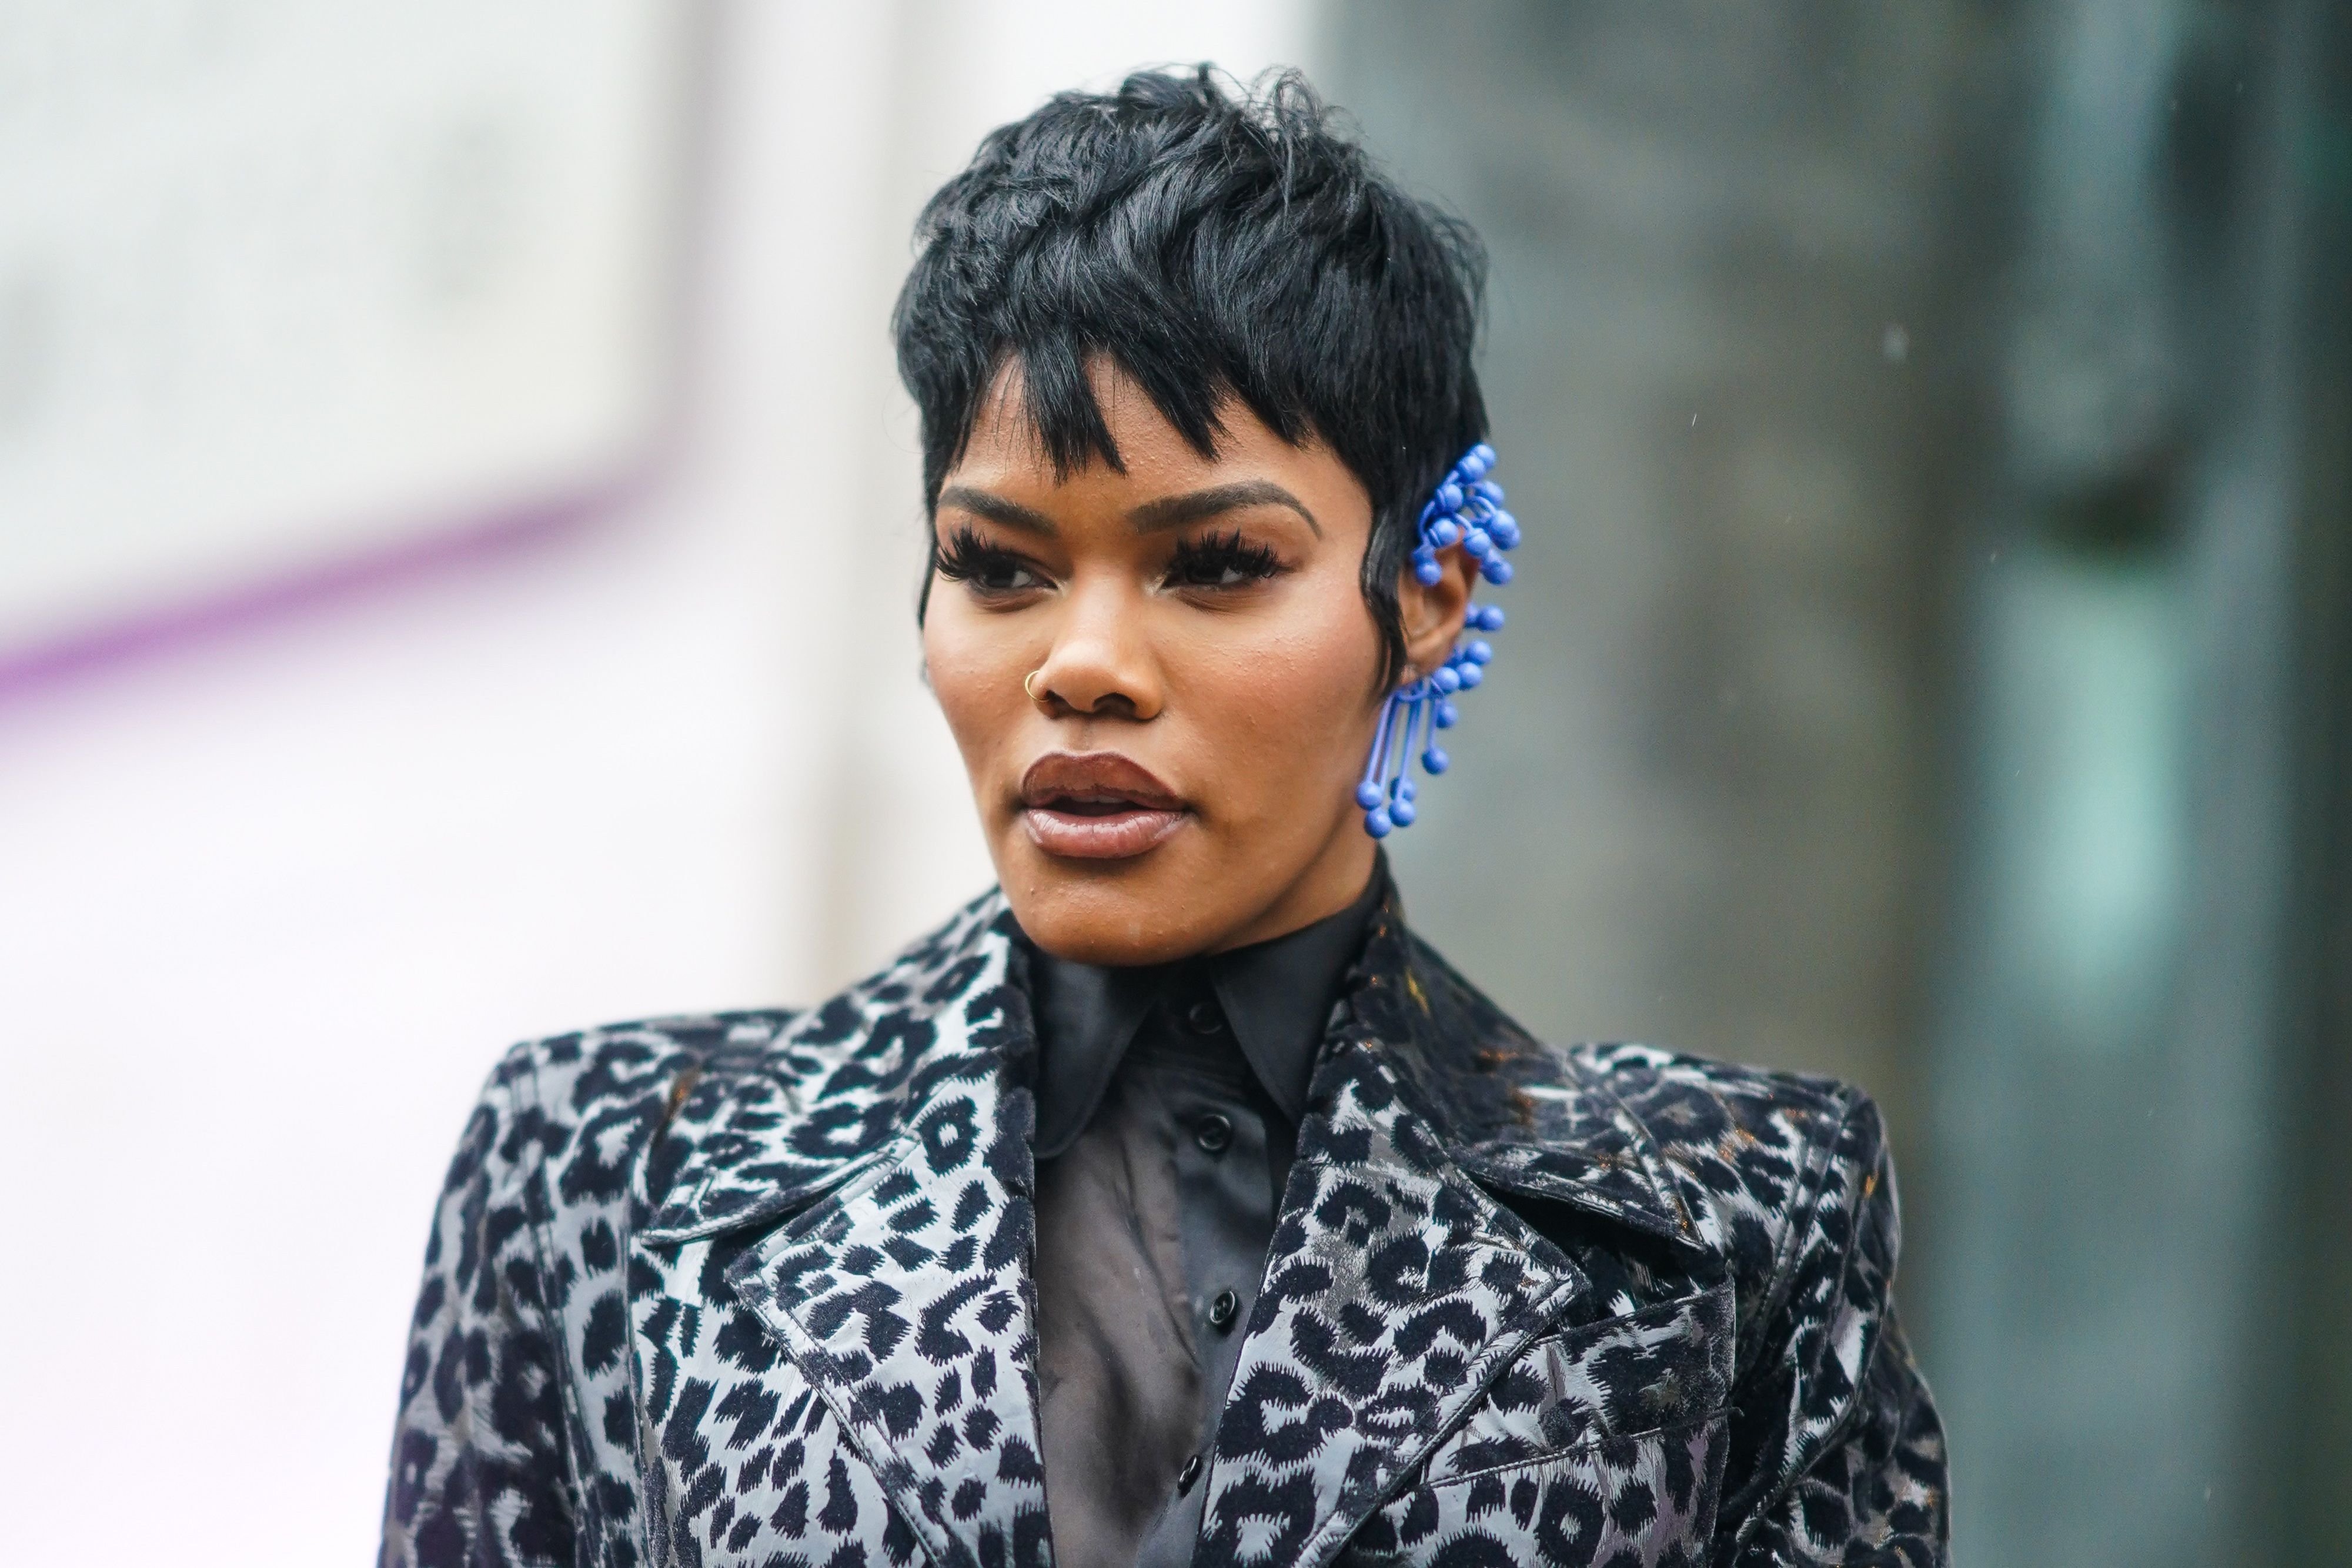 Teyana Taylor wears a black shirt, a long black and gray leopard print trench coat and a blue earring outside Mugler at Paris Fashion Week on February 26, 2020 | Photo: Getty Images